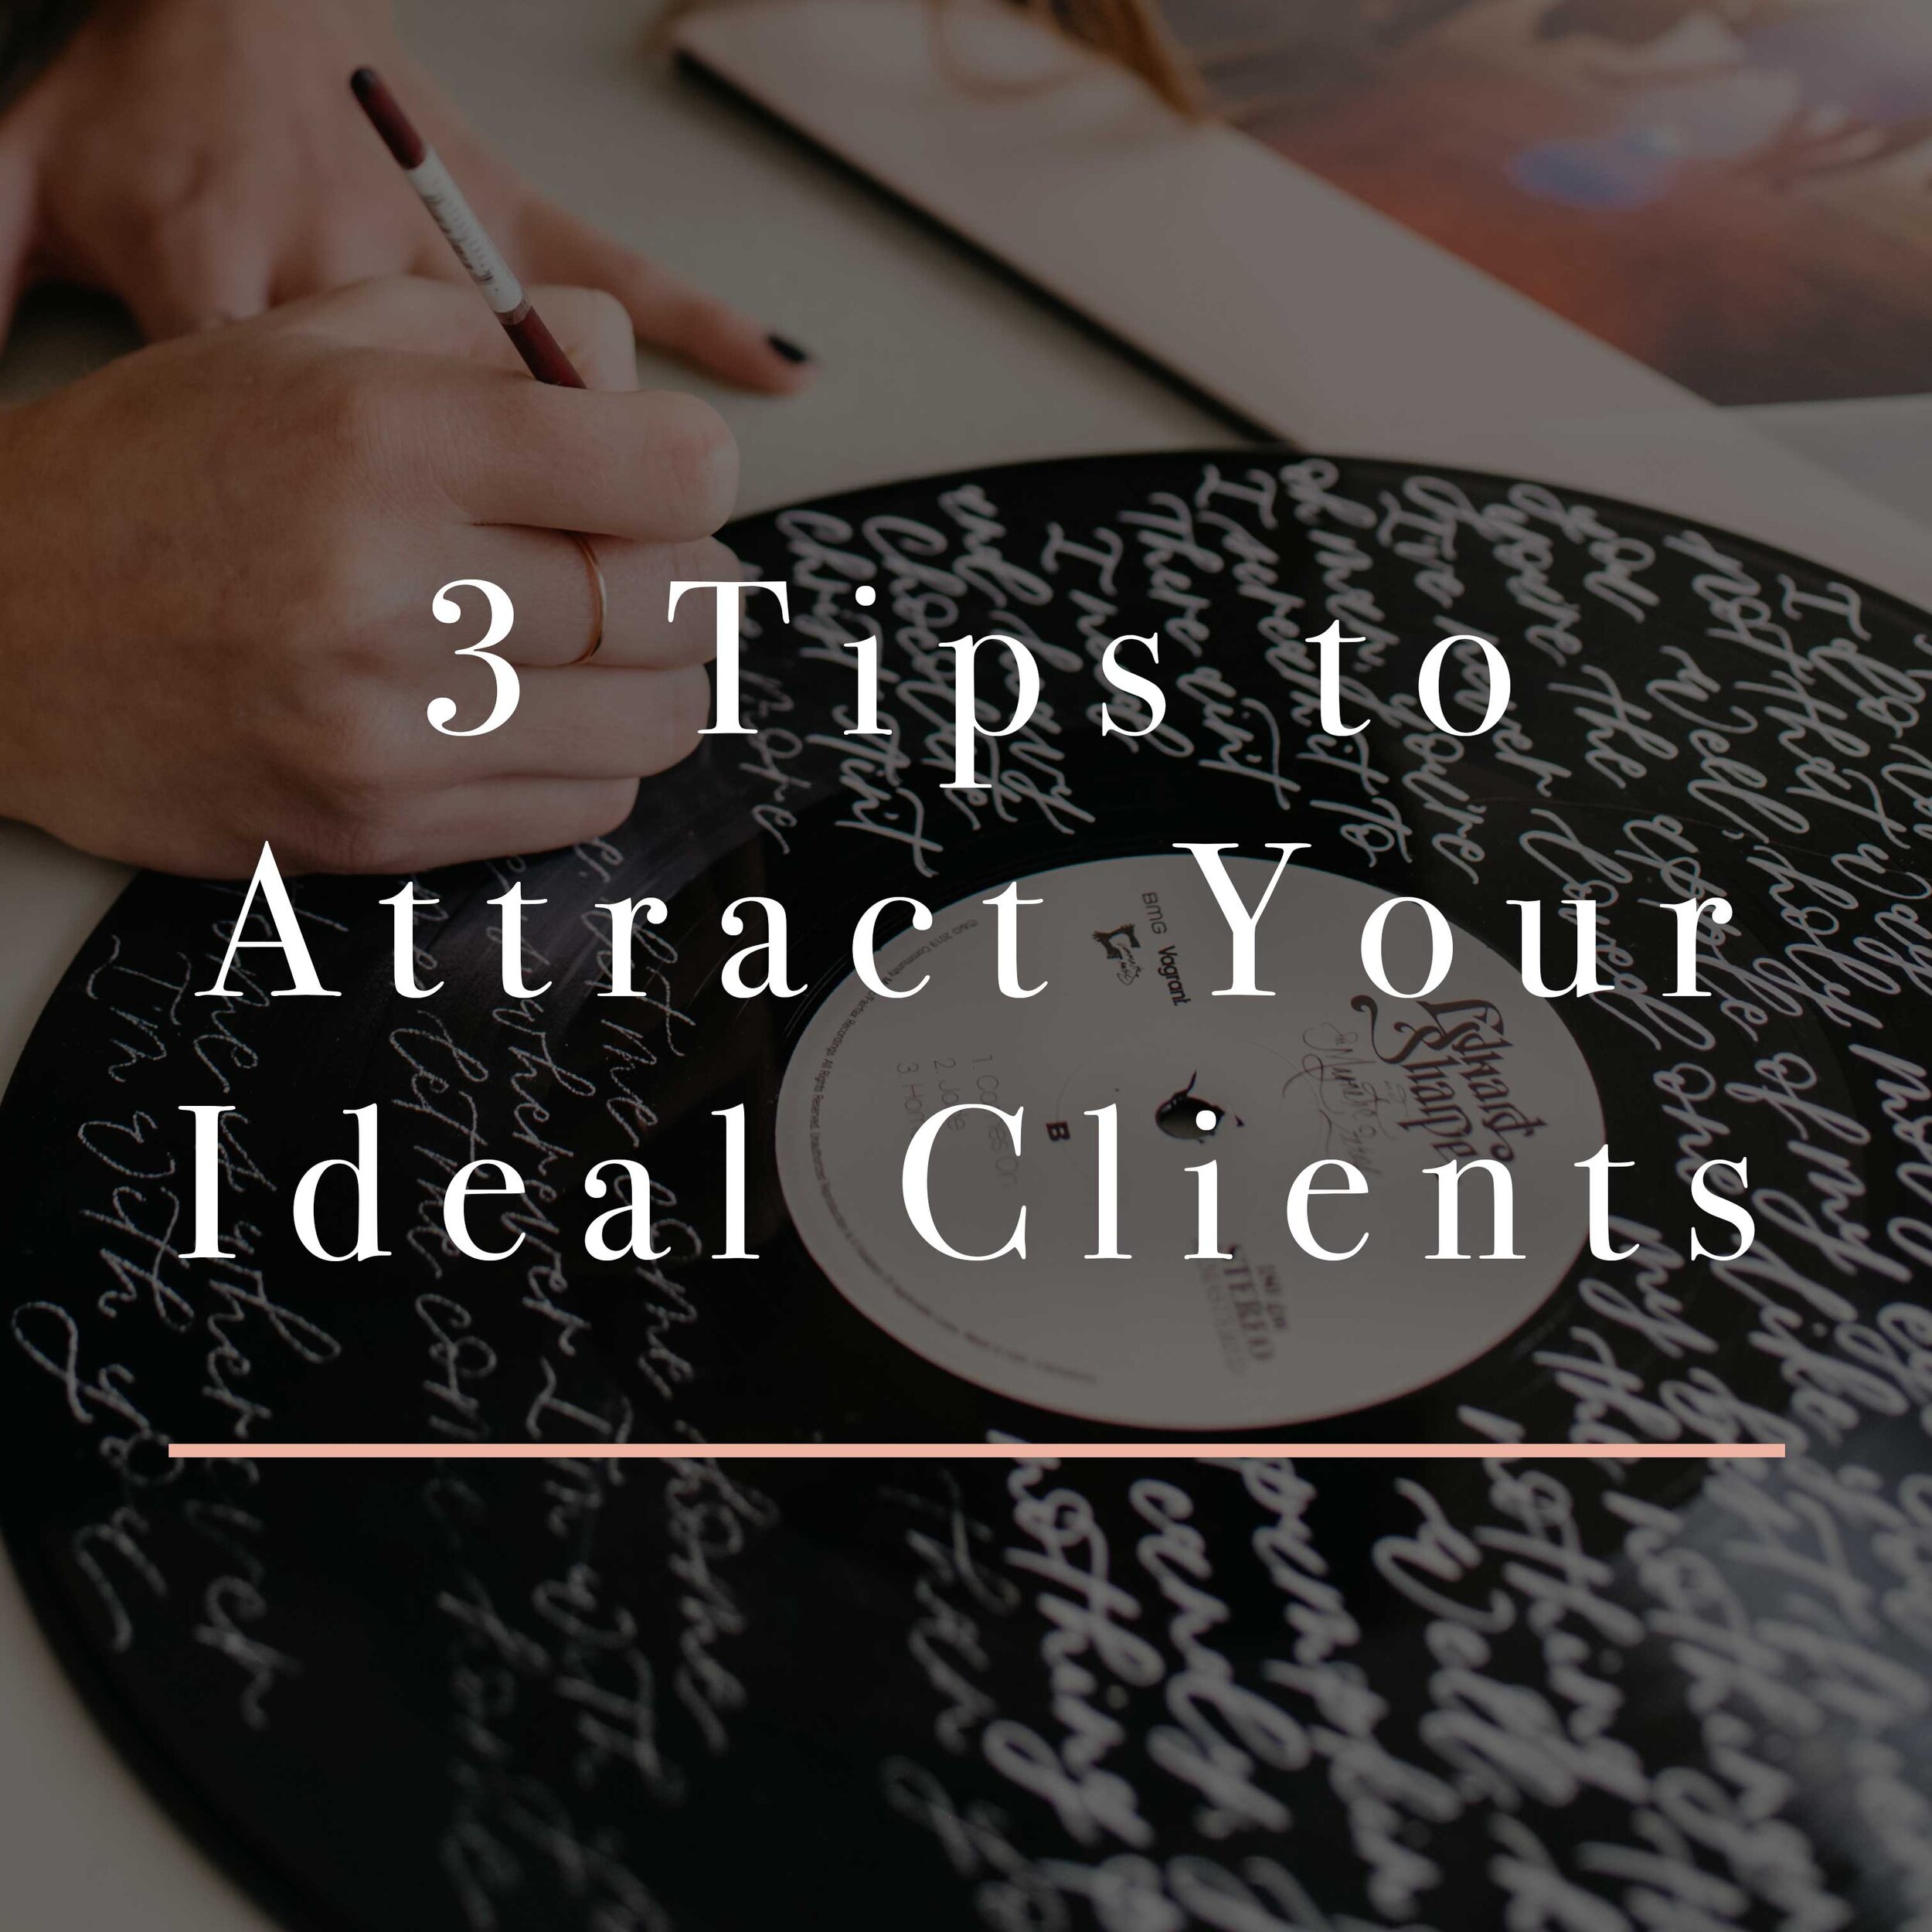 3 Tips to Attract Your Ideal Clients